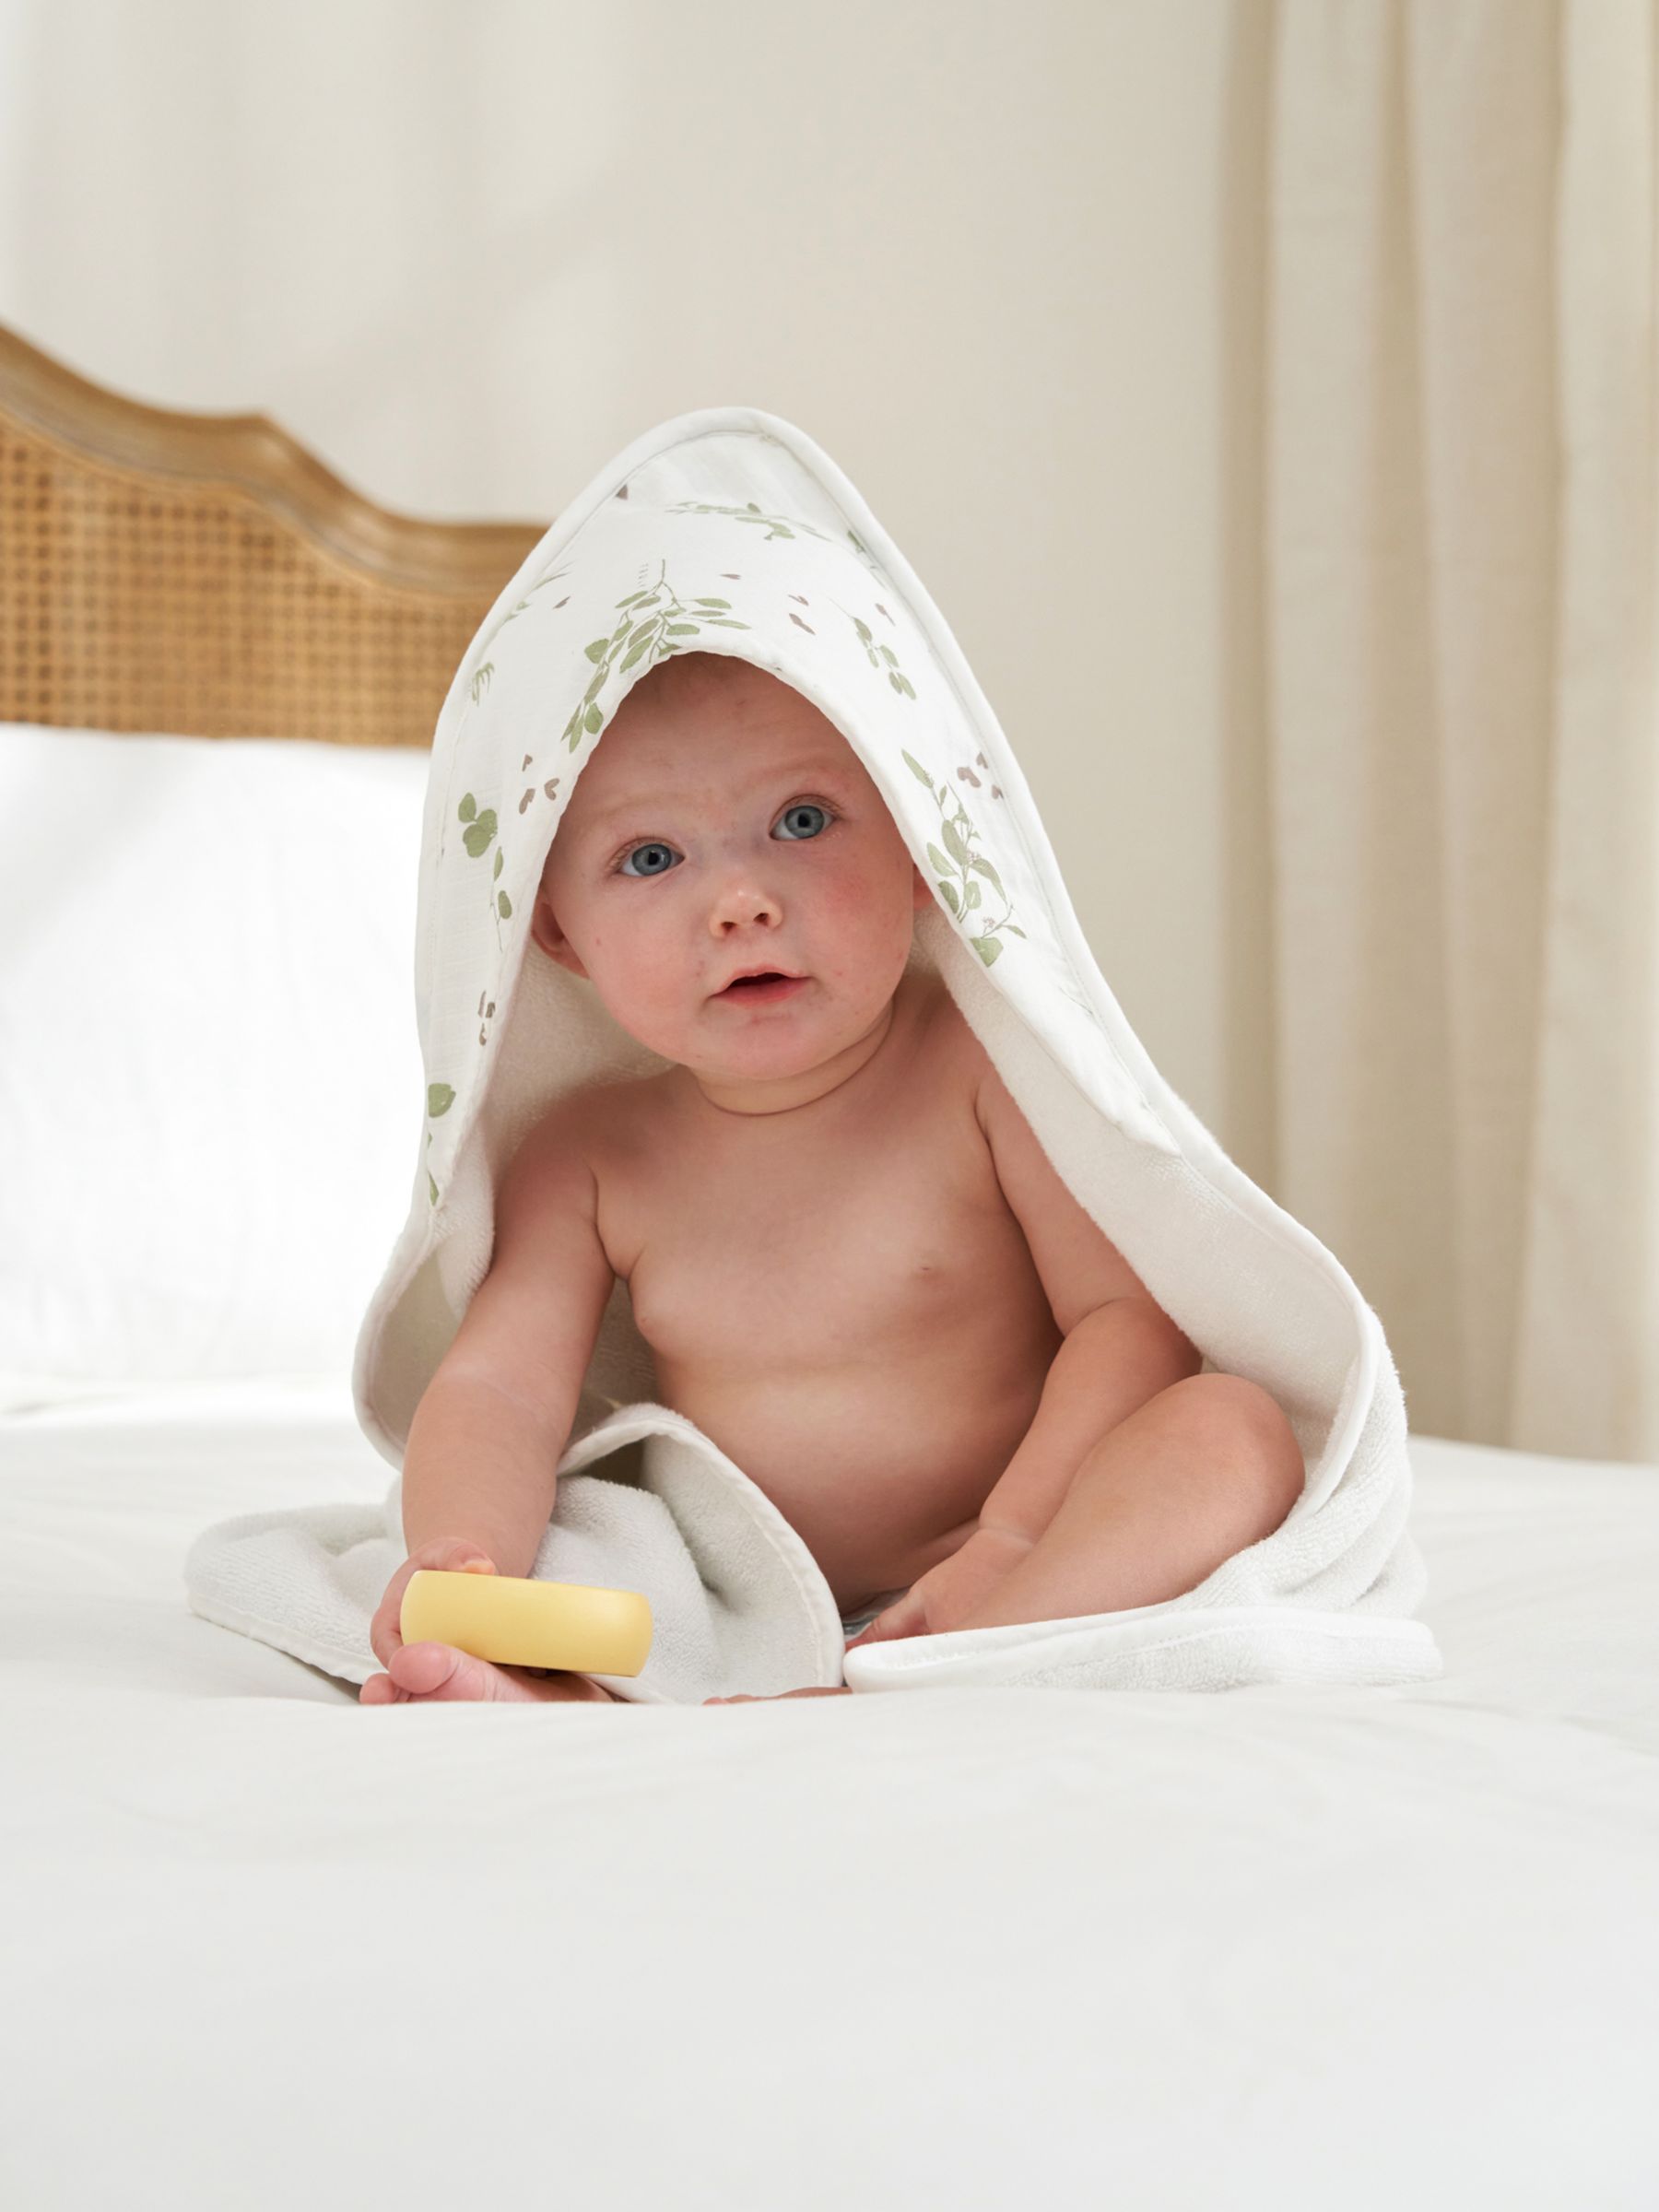 Truly Baby Eucalyptus Print Hooded Baby Towel, White/Multi, One Size